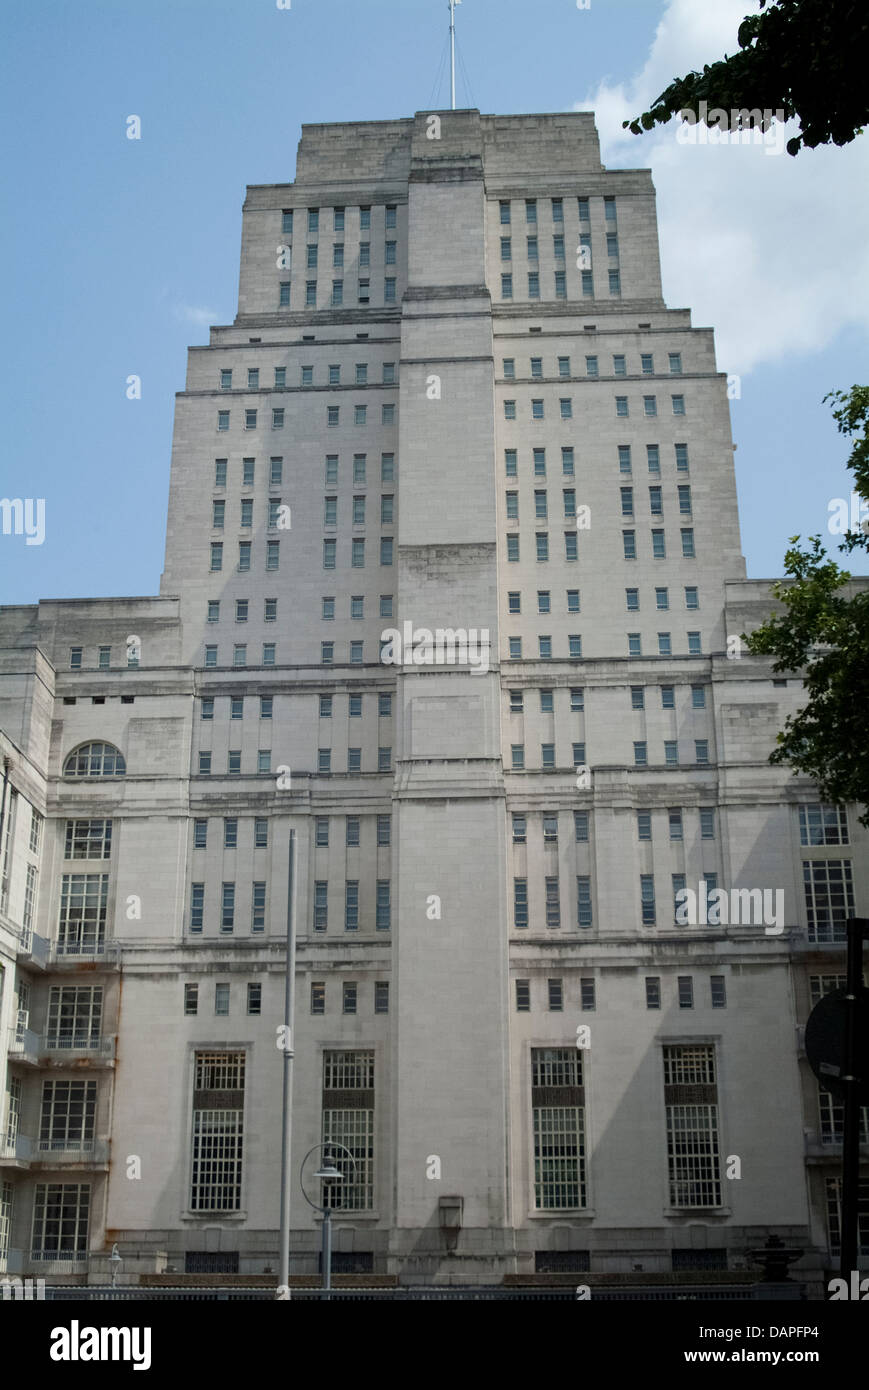 Senate House, London, Library and Conference Centre Stock Photo